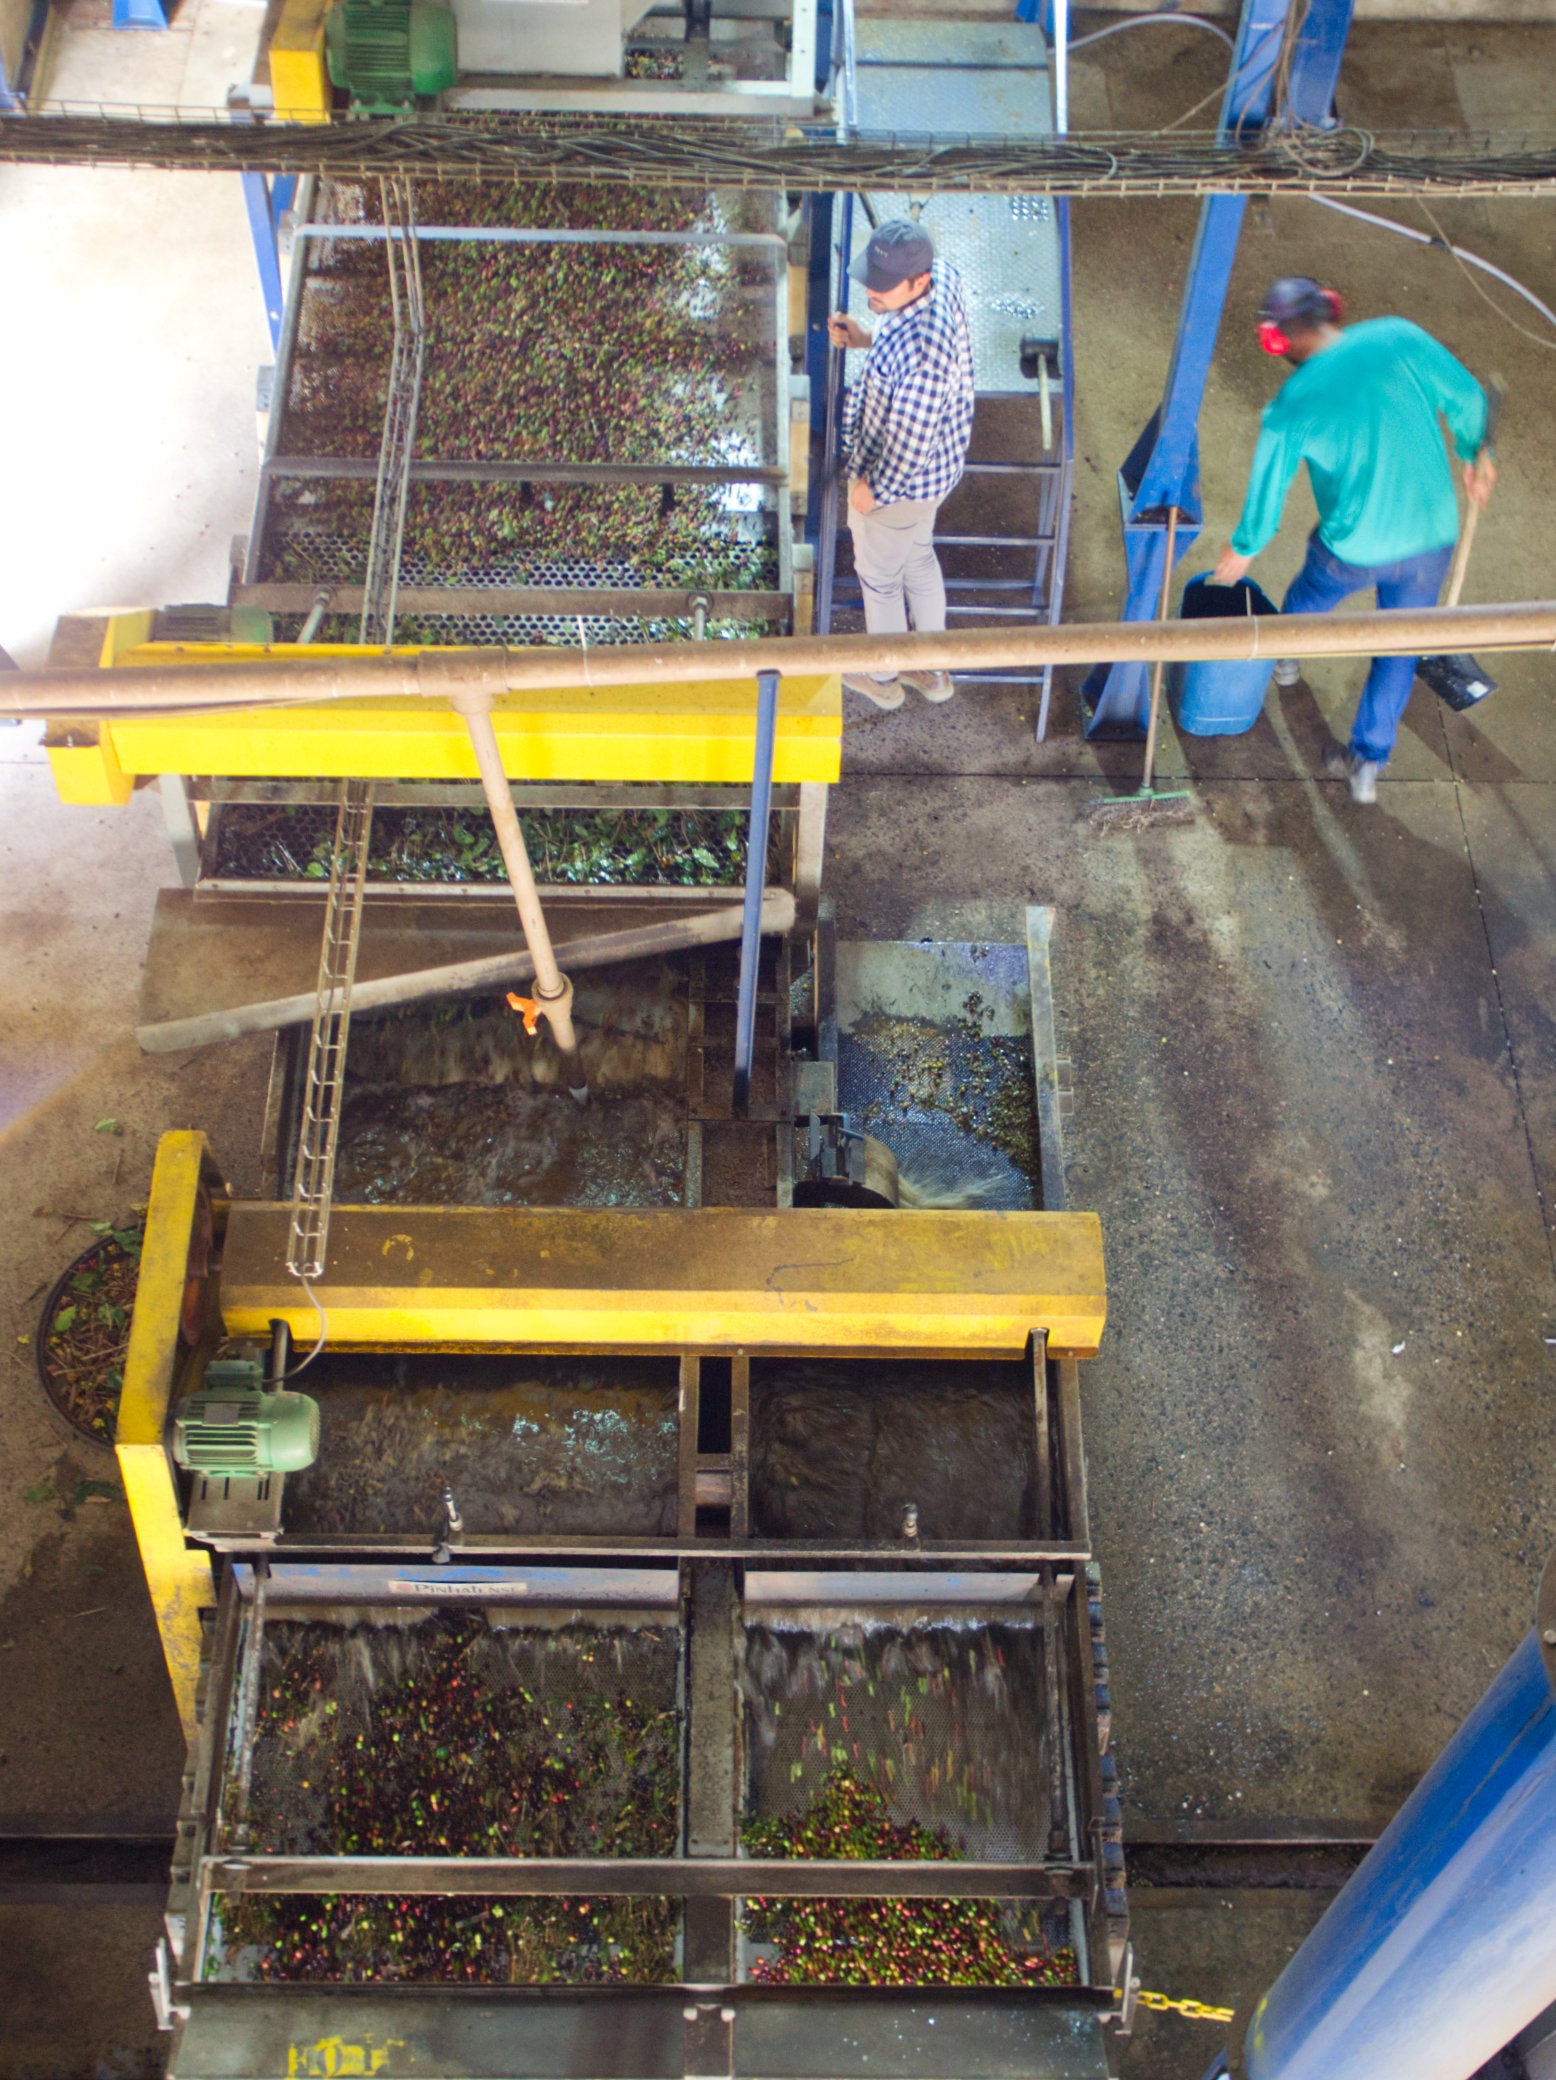 Sorting machine for freshly harvested coffee cherries on a farm in Brazil that Mats visited in 2022.